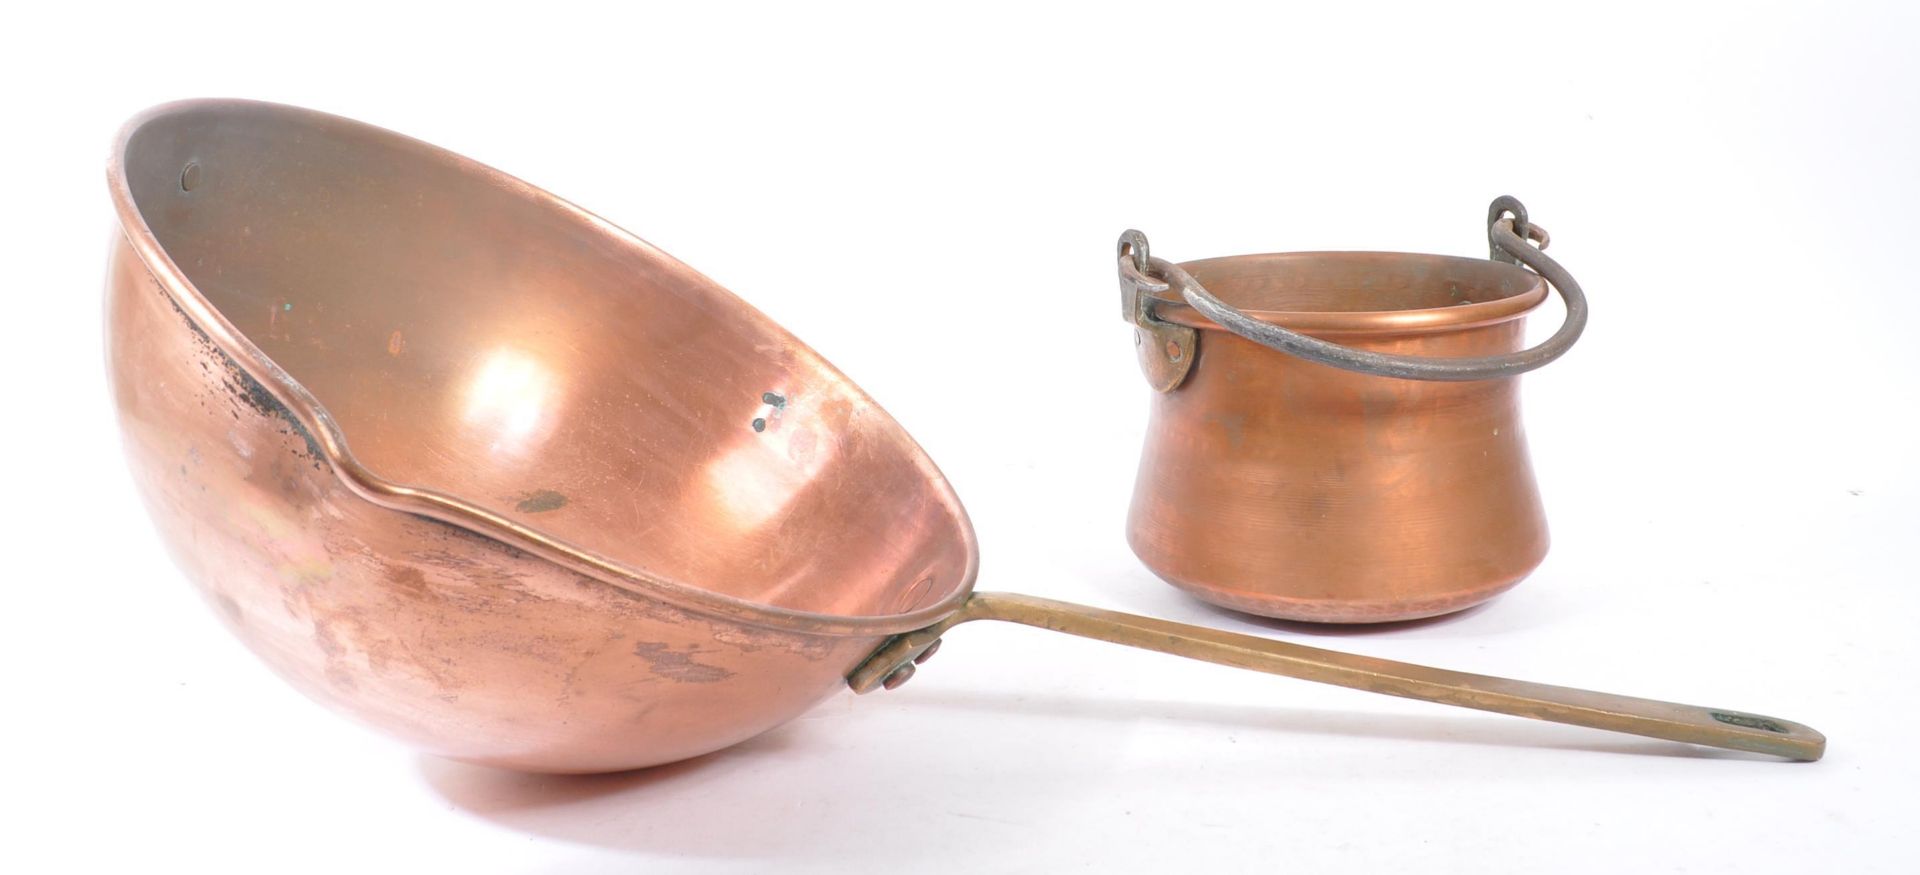 EARLY 20TH CENTURY MIDDLE EASTERN COPPER COOKING PAN / WOK